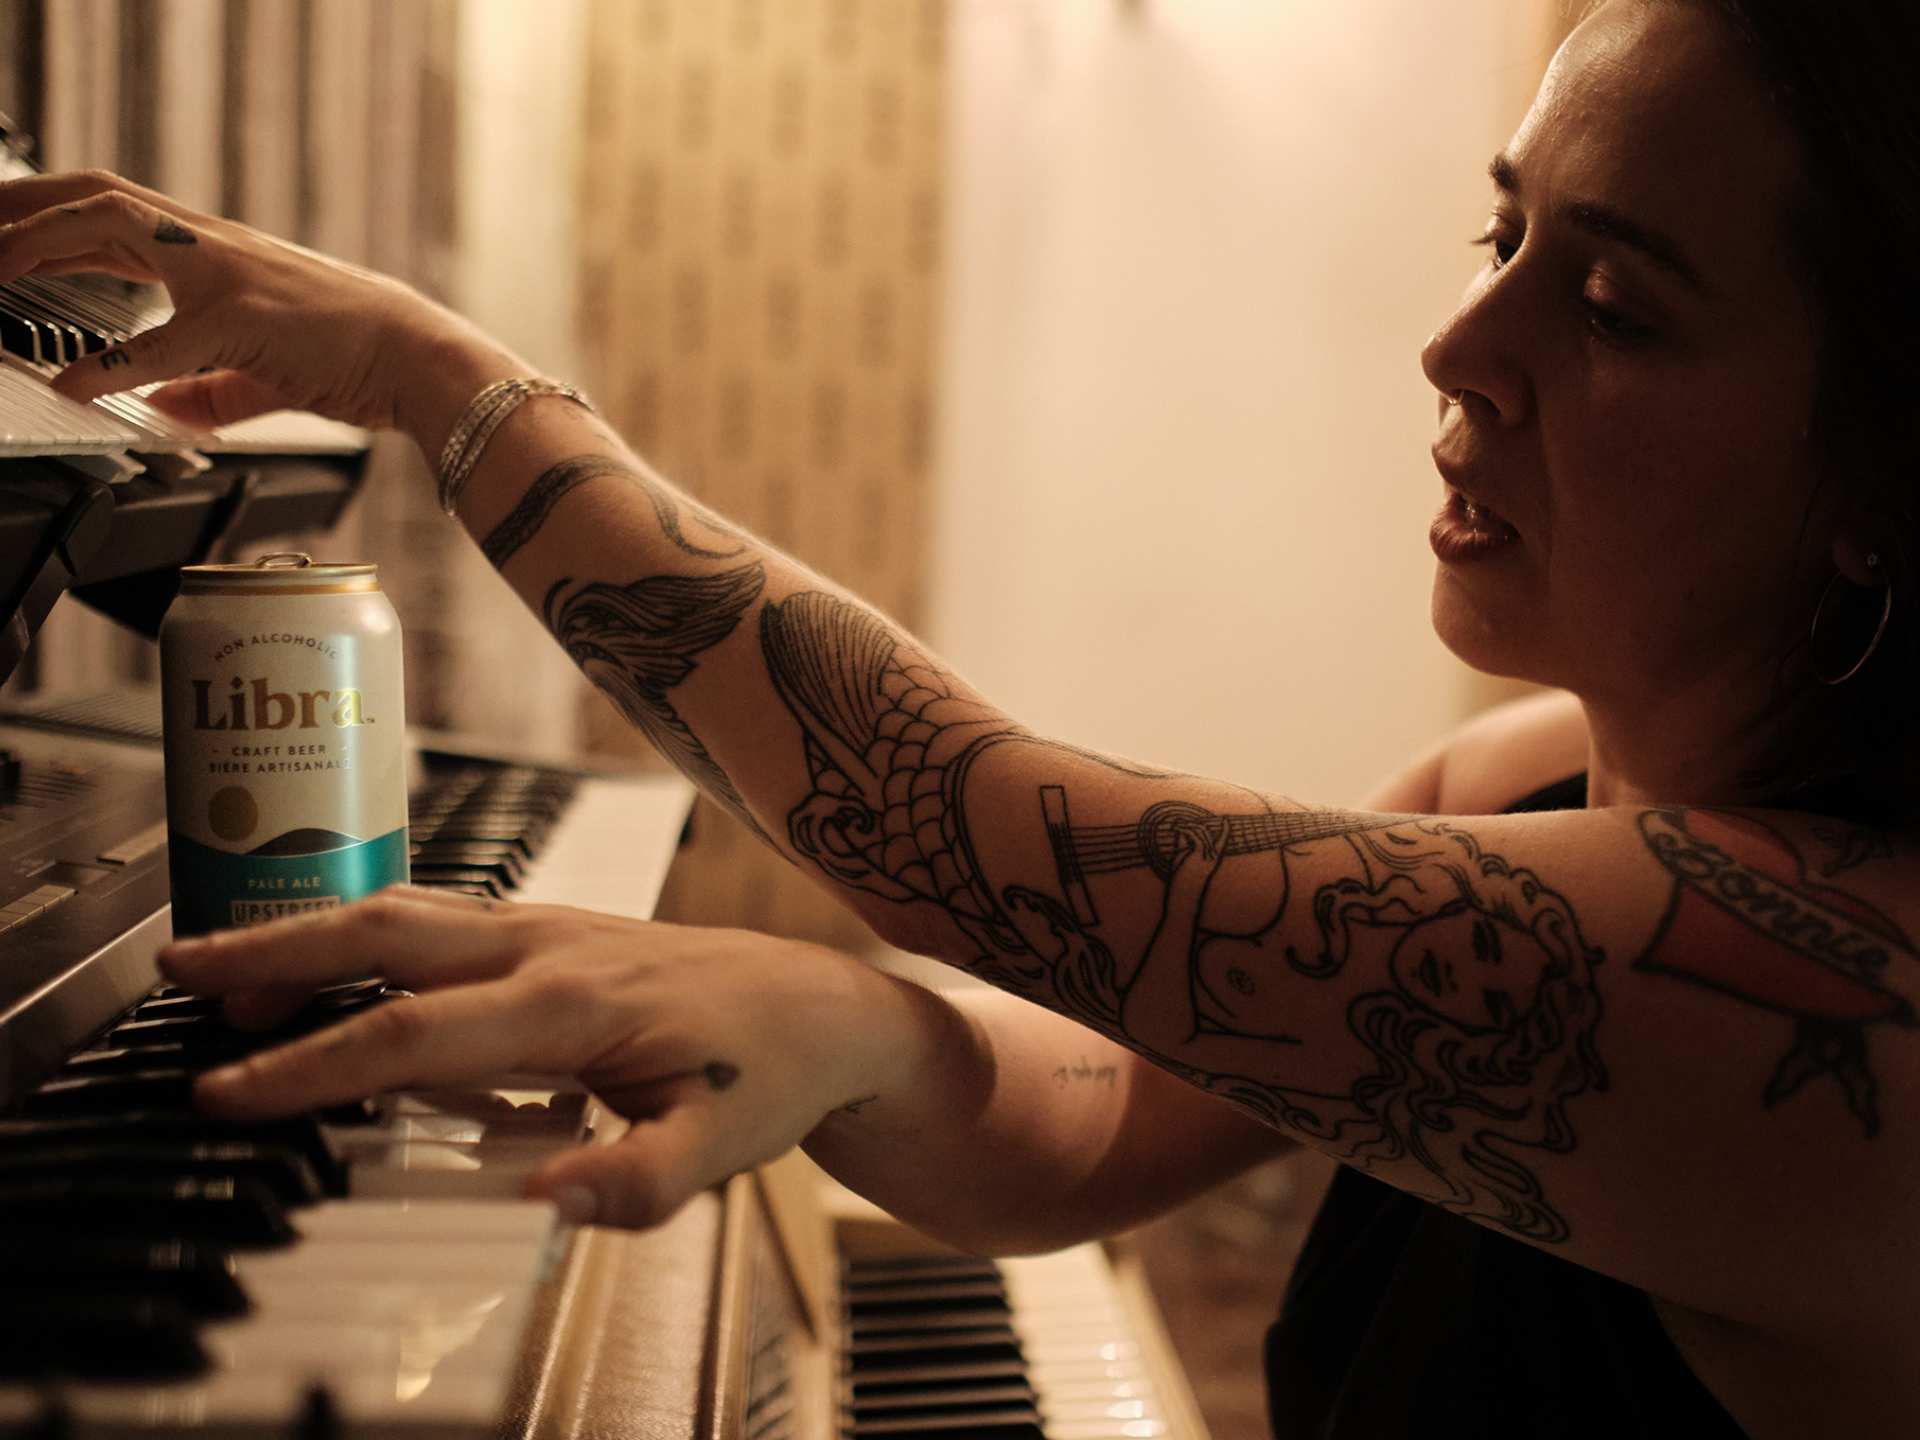 Serena Ryder at her piano with a can of Libra non-alcoholic beer